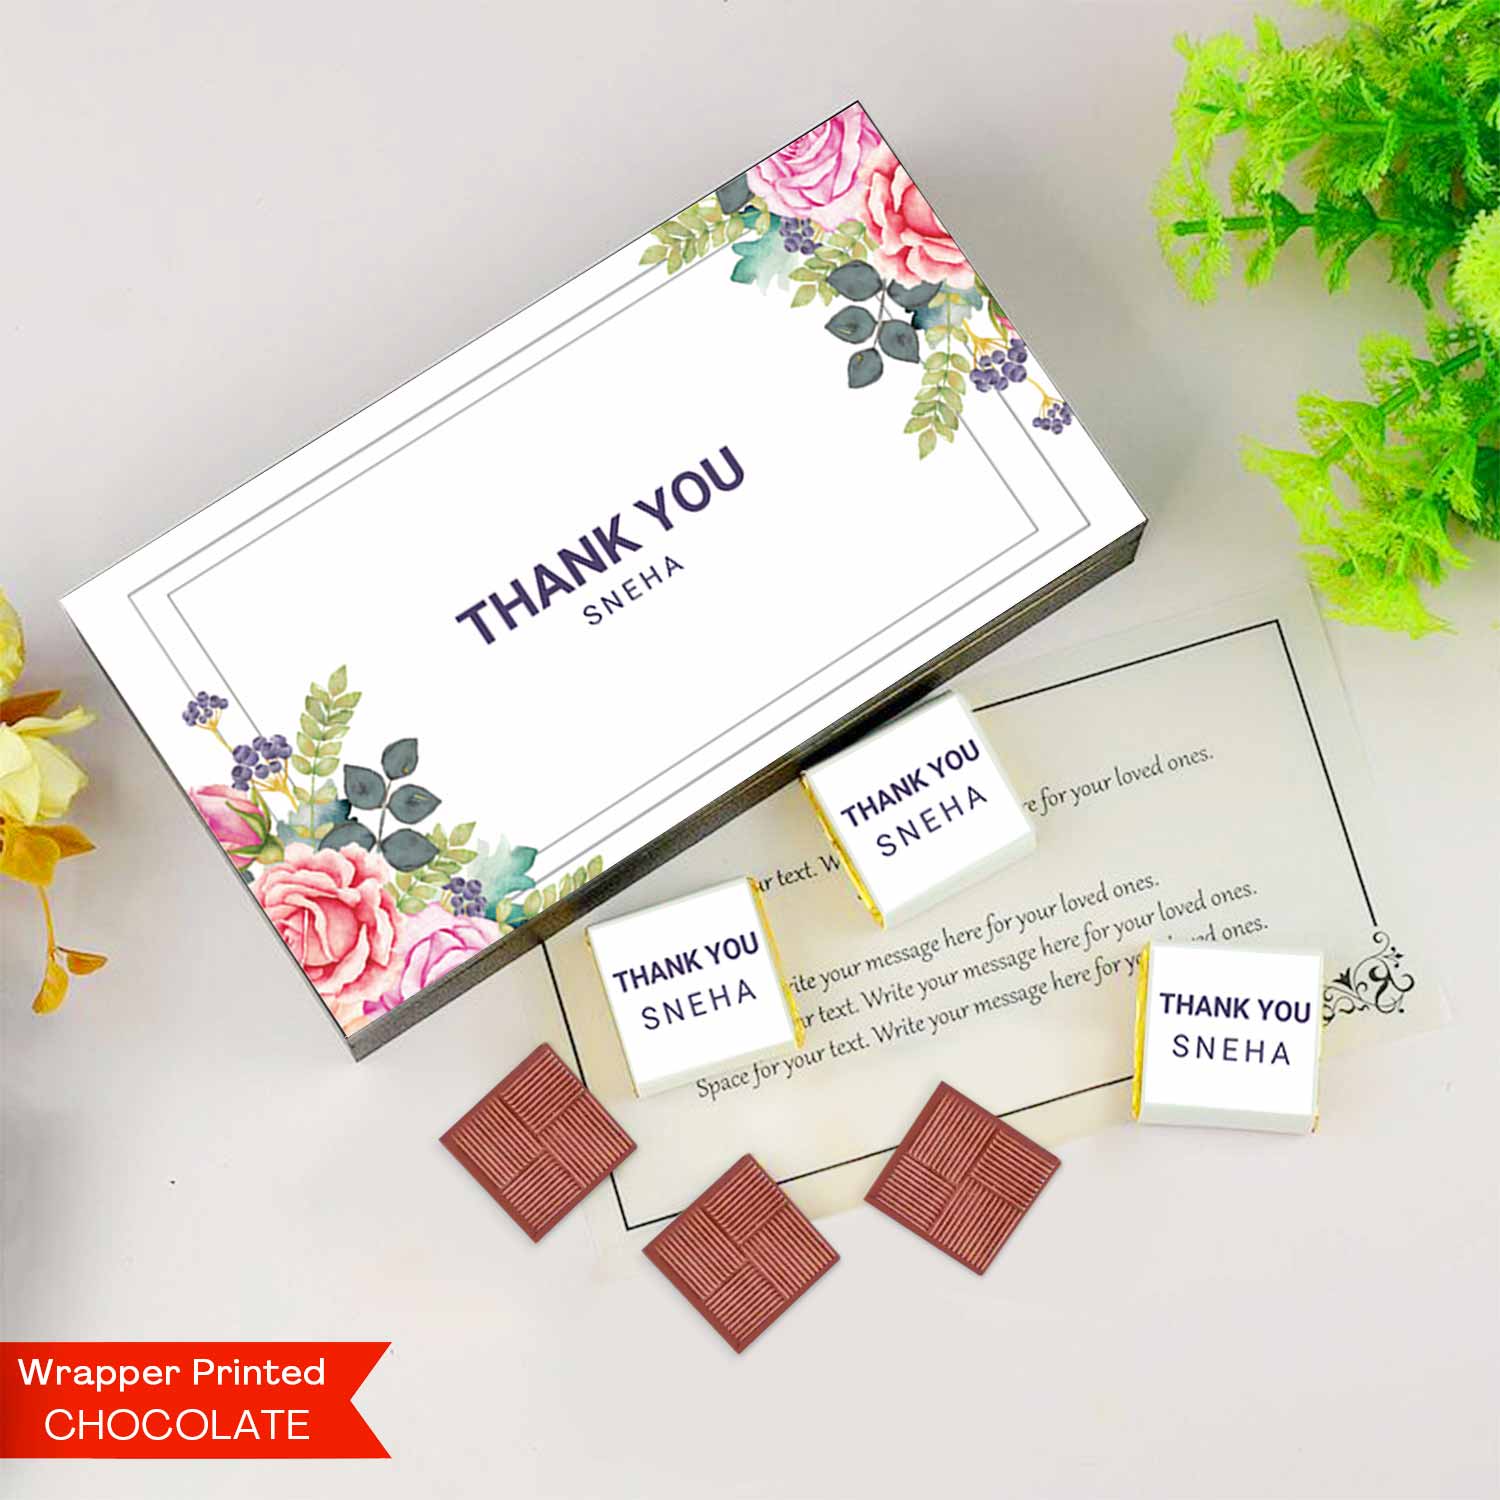 Name printed chocolate box I  Thank you gift for best friend I  Delicious chocolates I  Elegant wooden packaging I  Free shipping across India